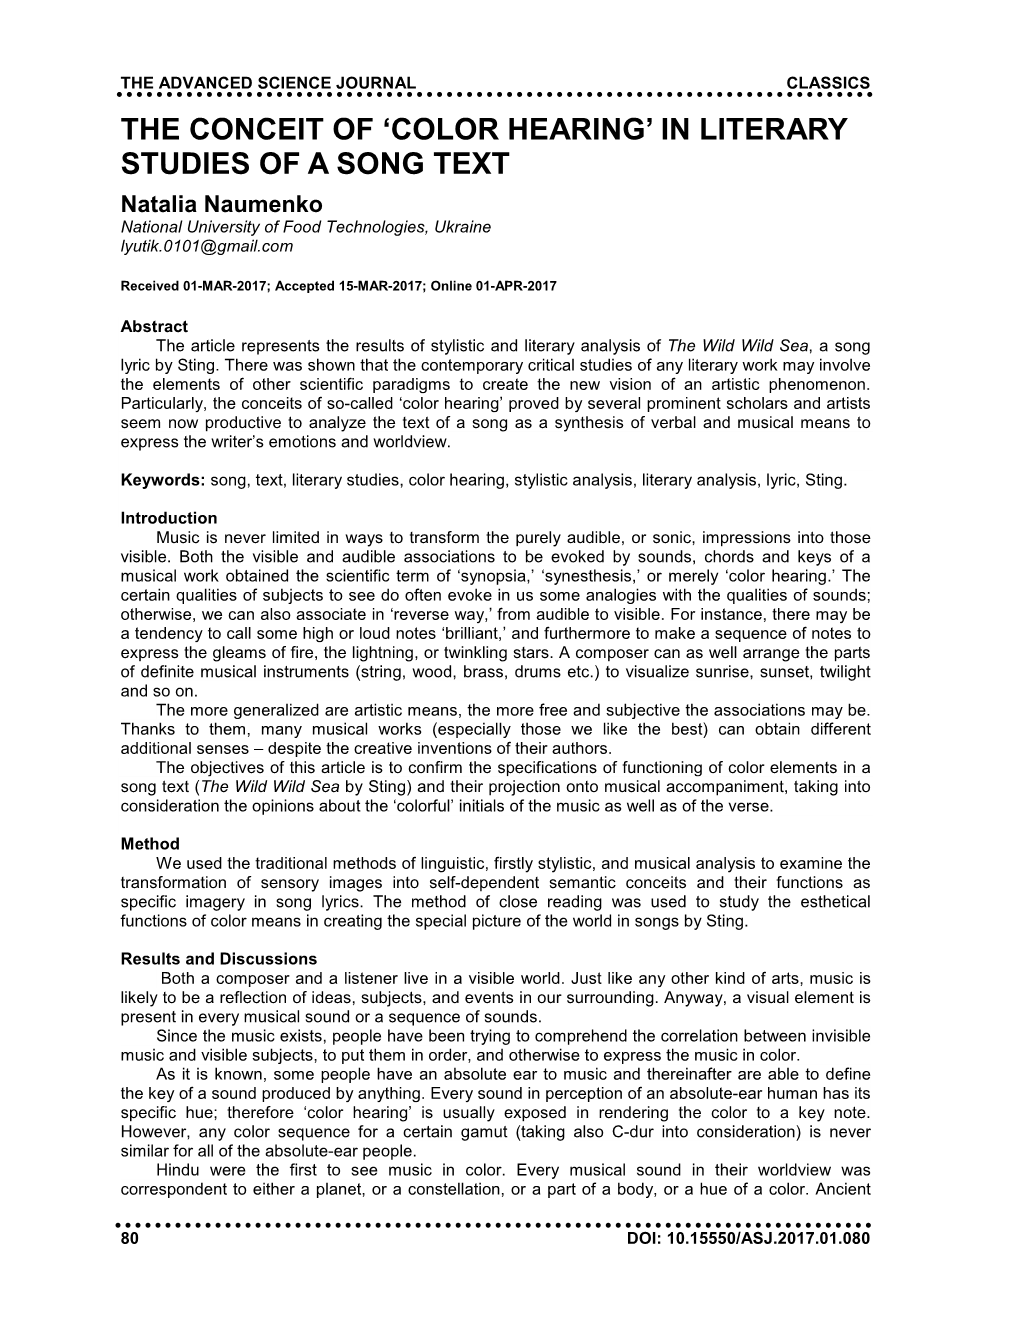 In Literary Studies of a Song Text